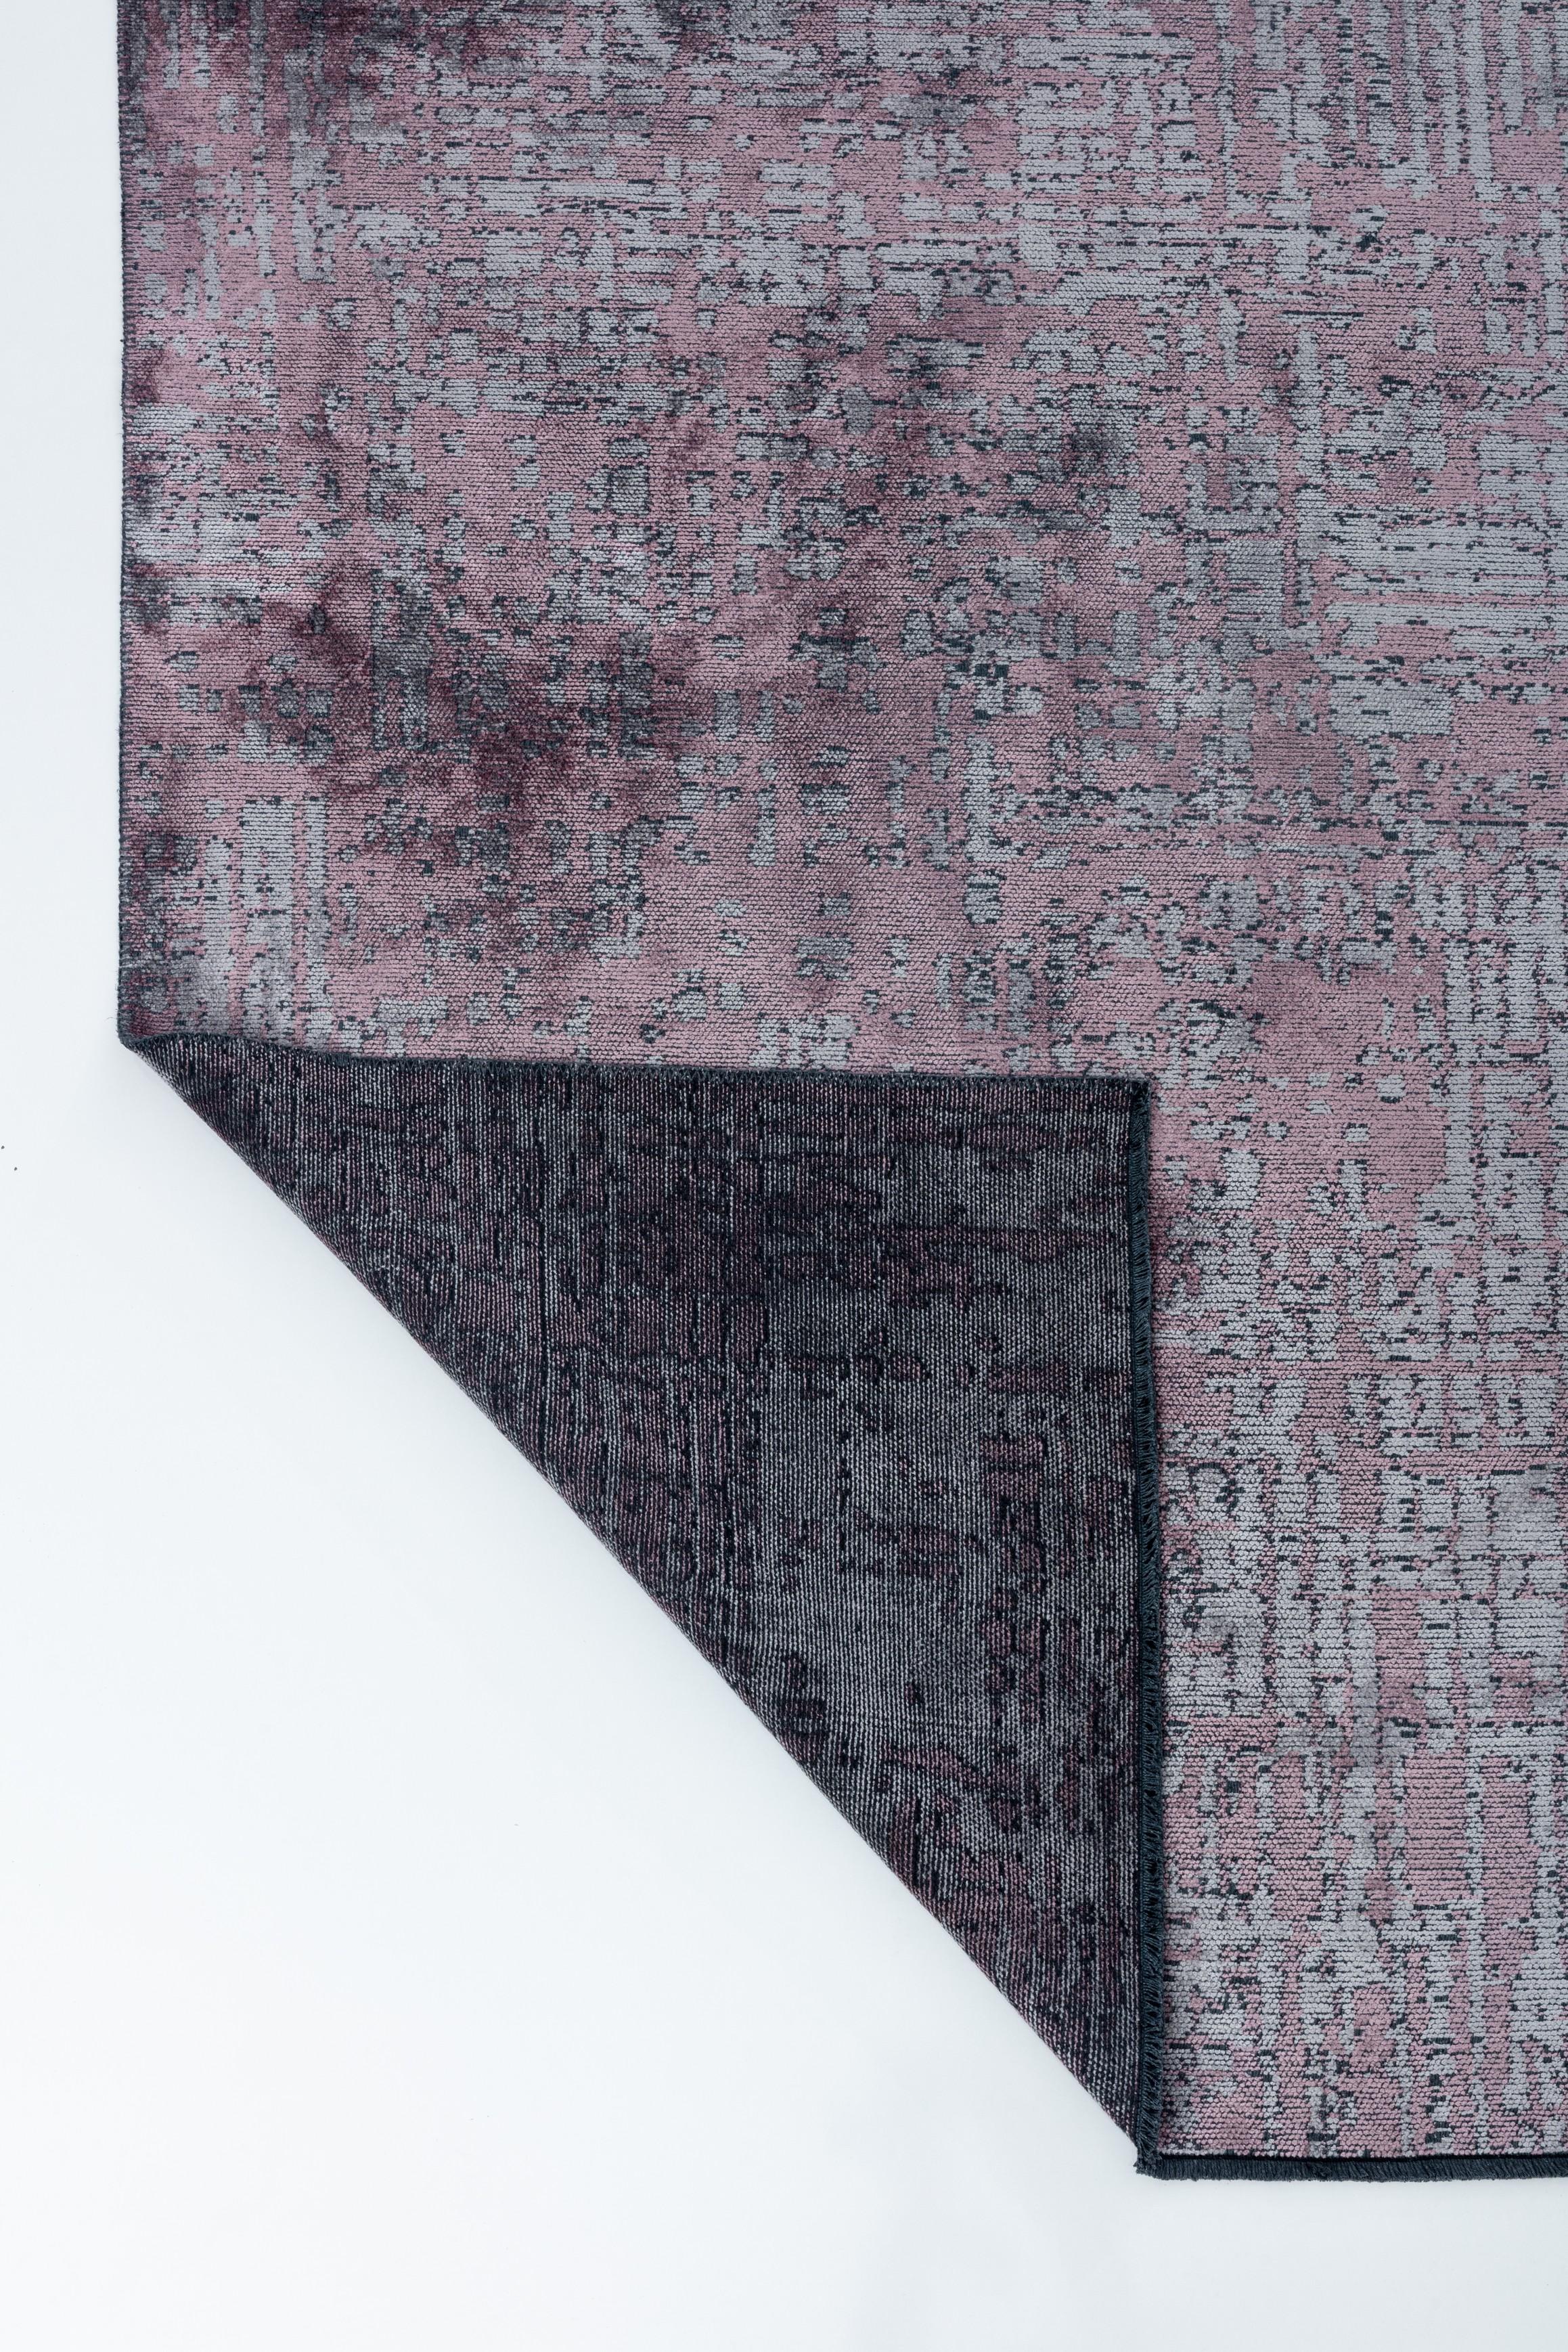 For Sale:  (Pink) Modern Abstract Luxury Area Rug 3